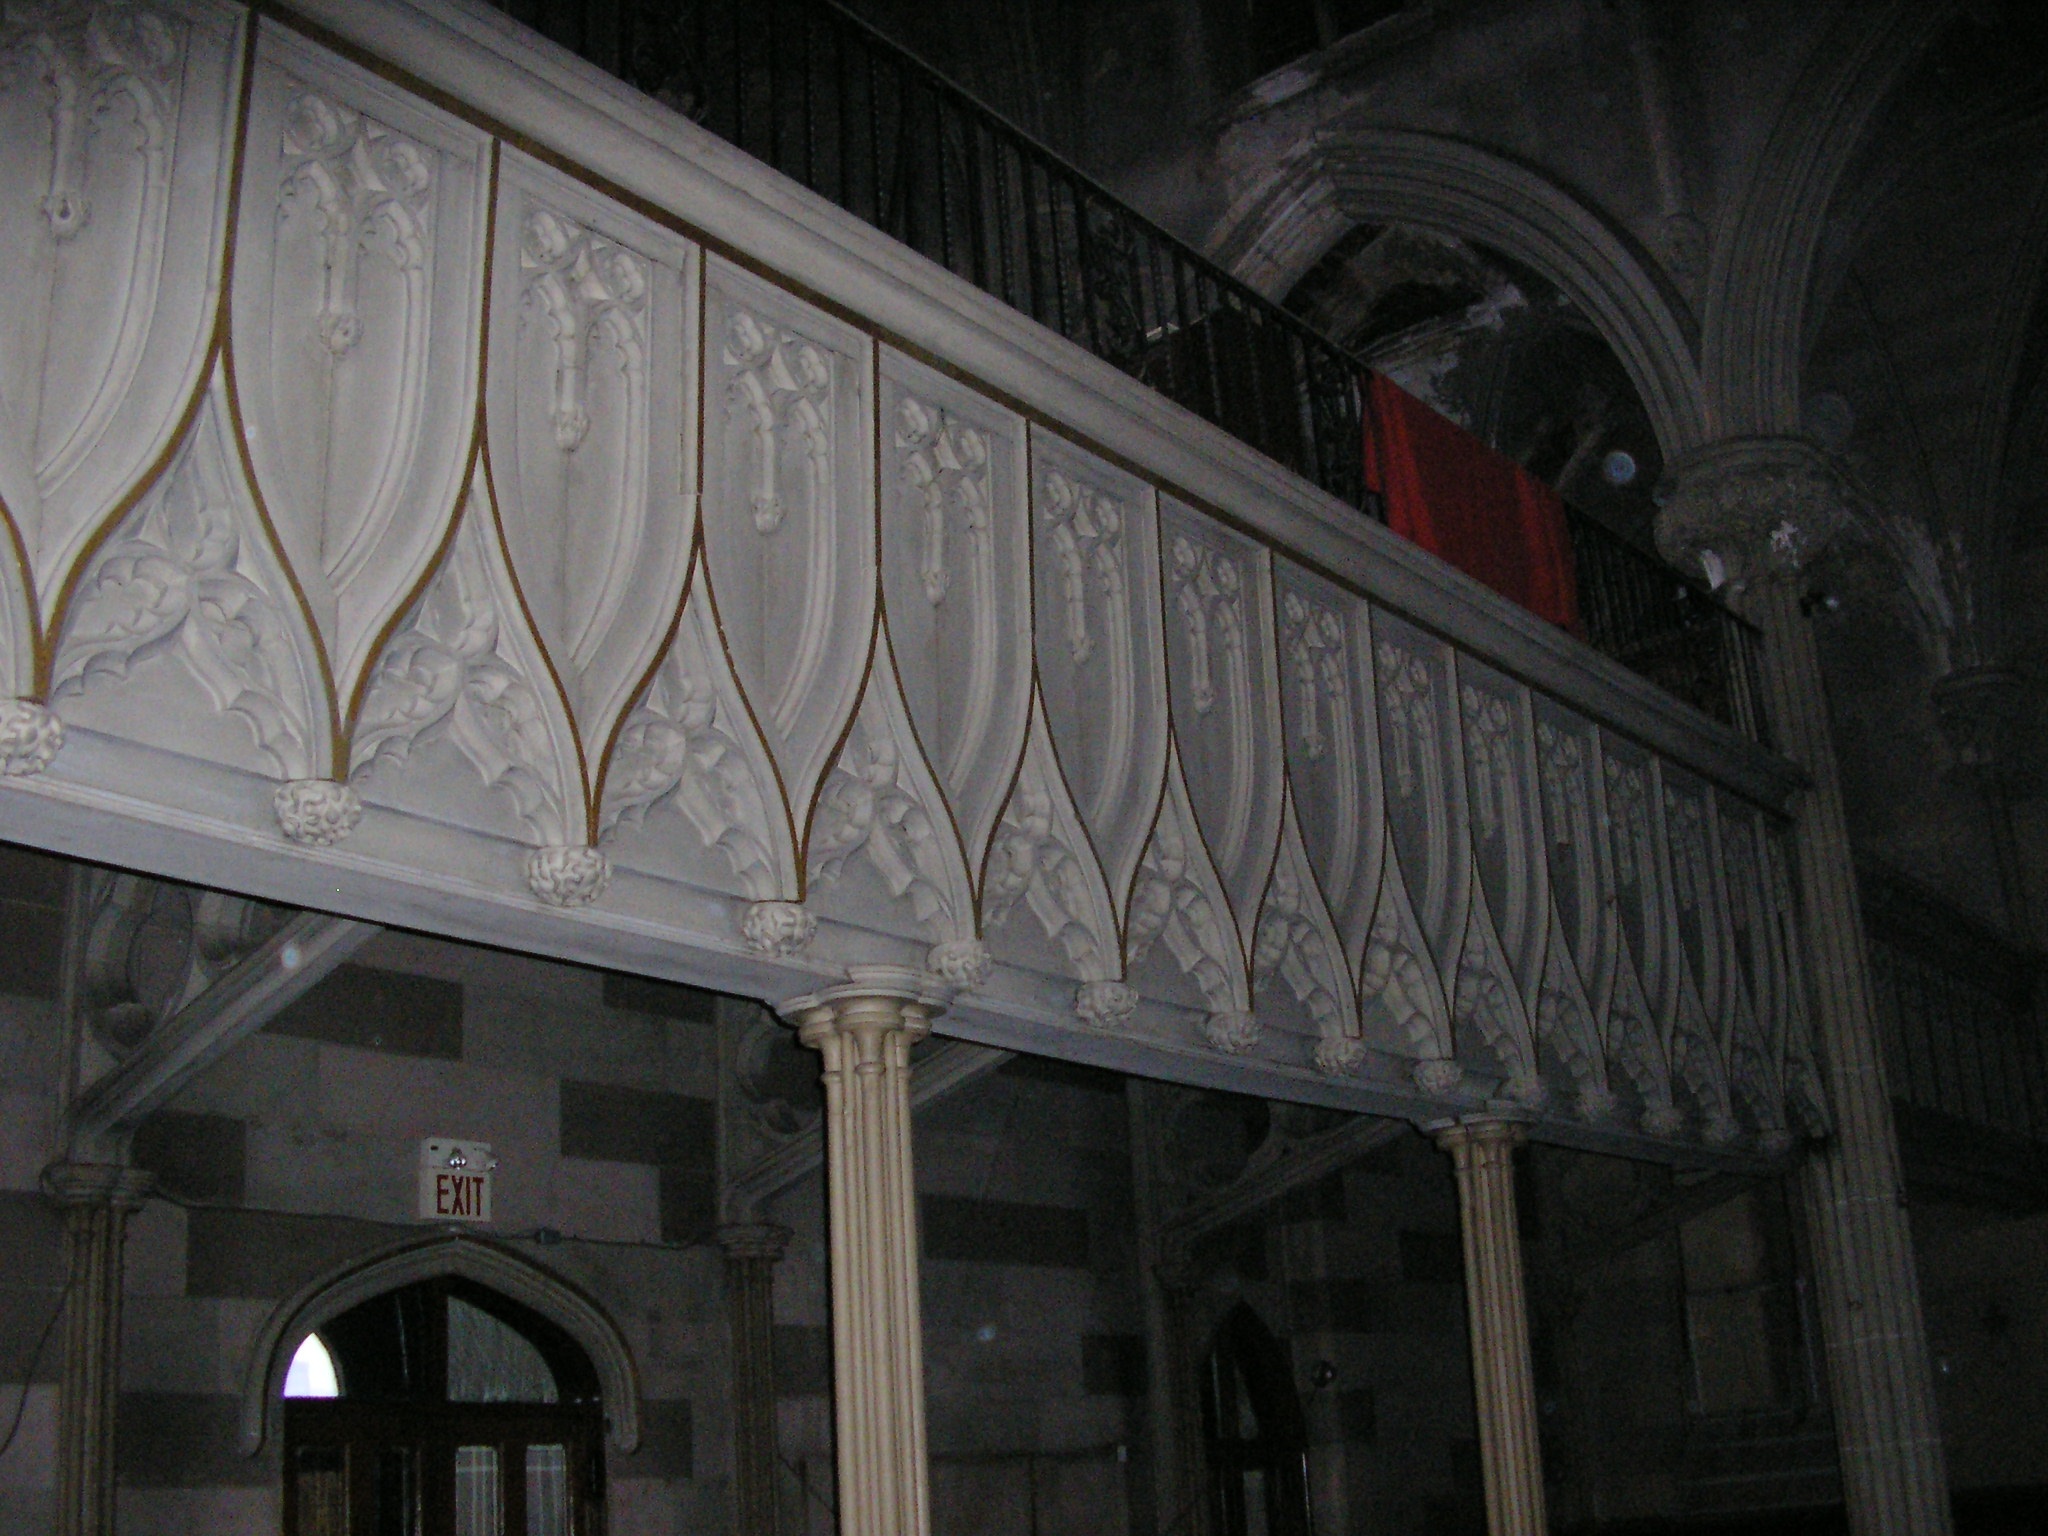 The interior decorative plaster was intact in 2007.